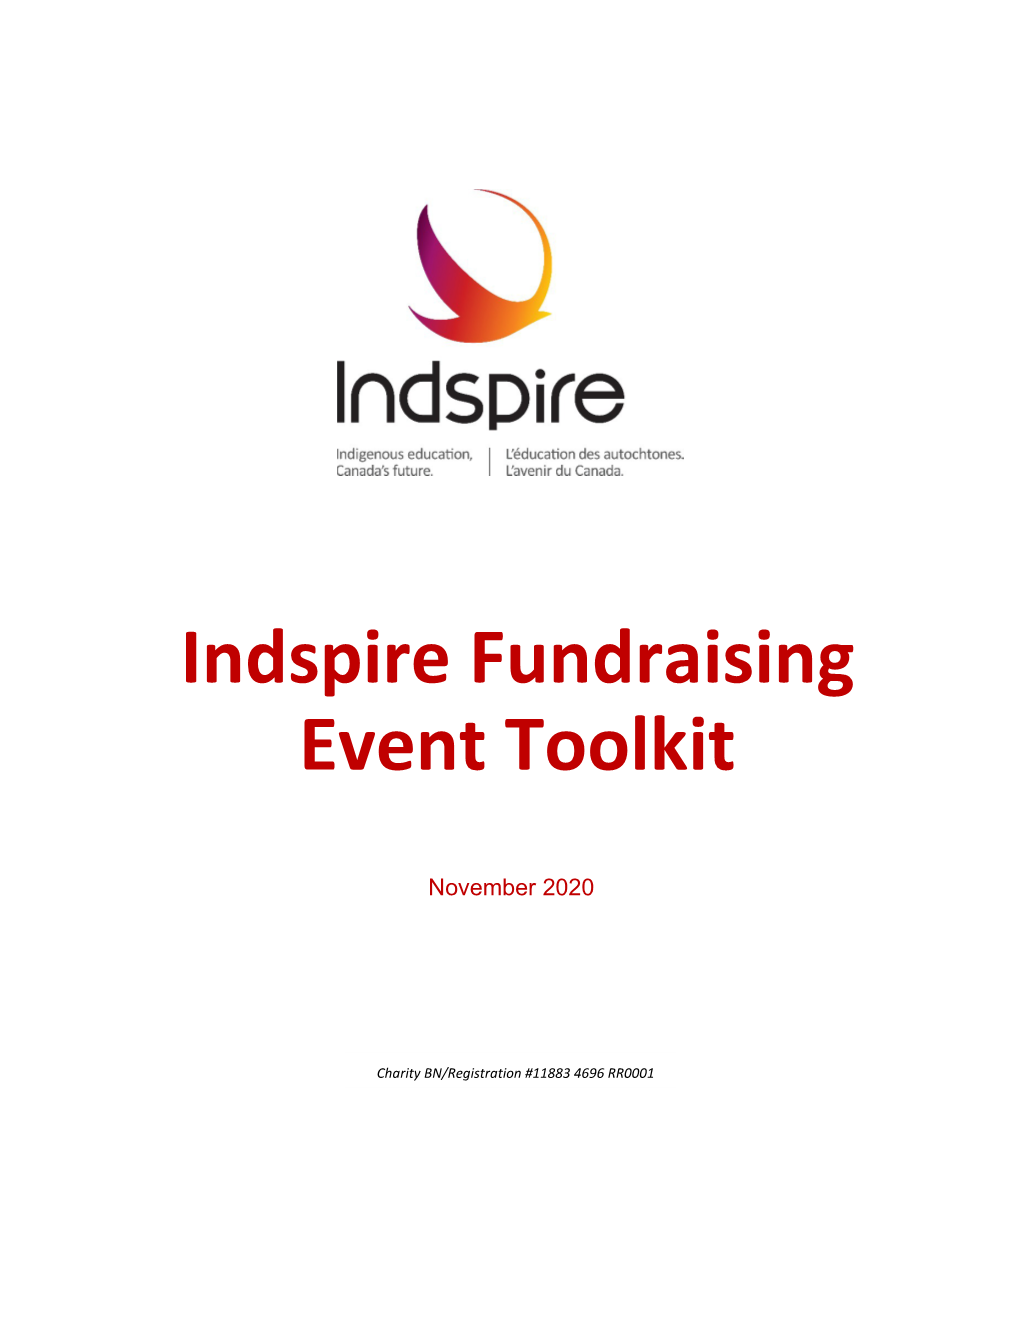 Indspire Fundraising Event Toolkit